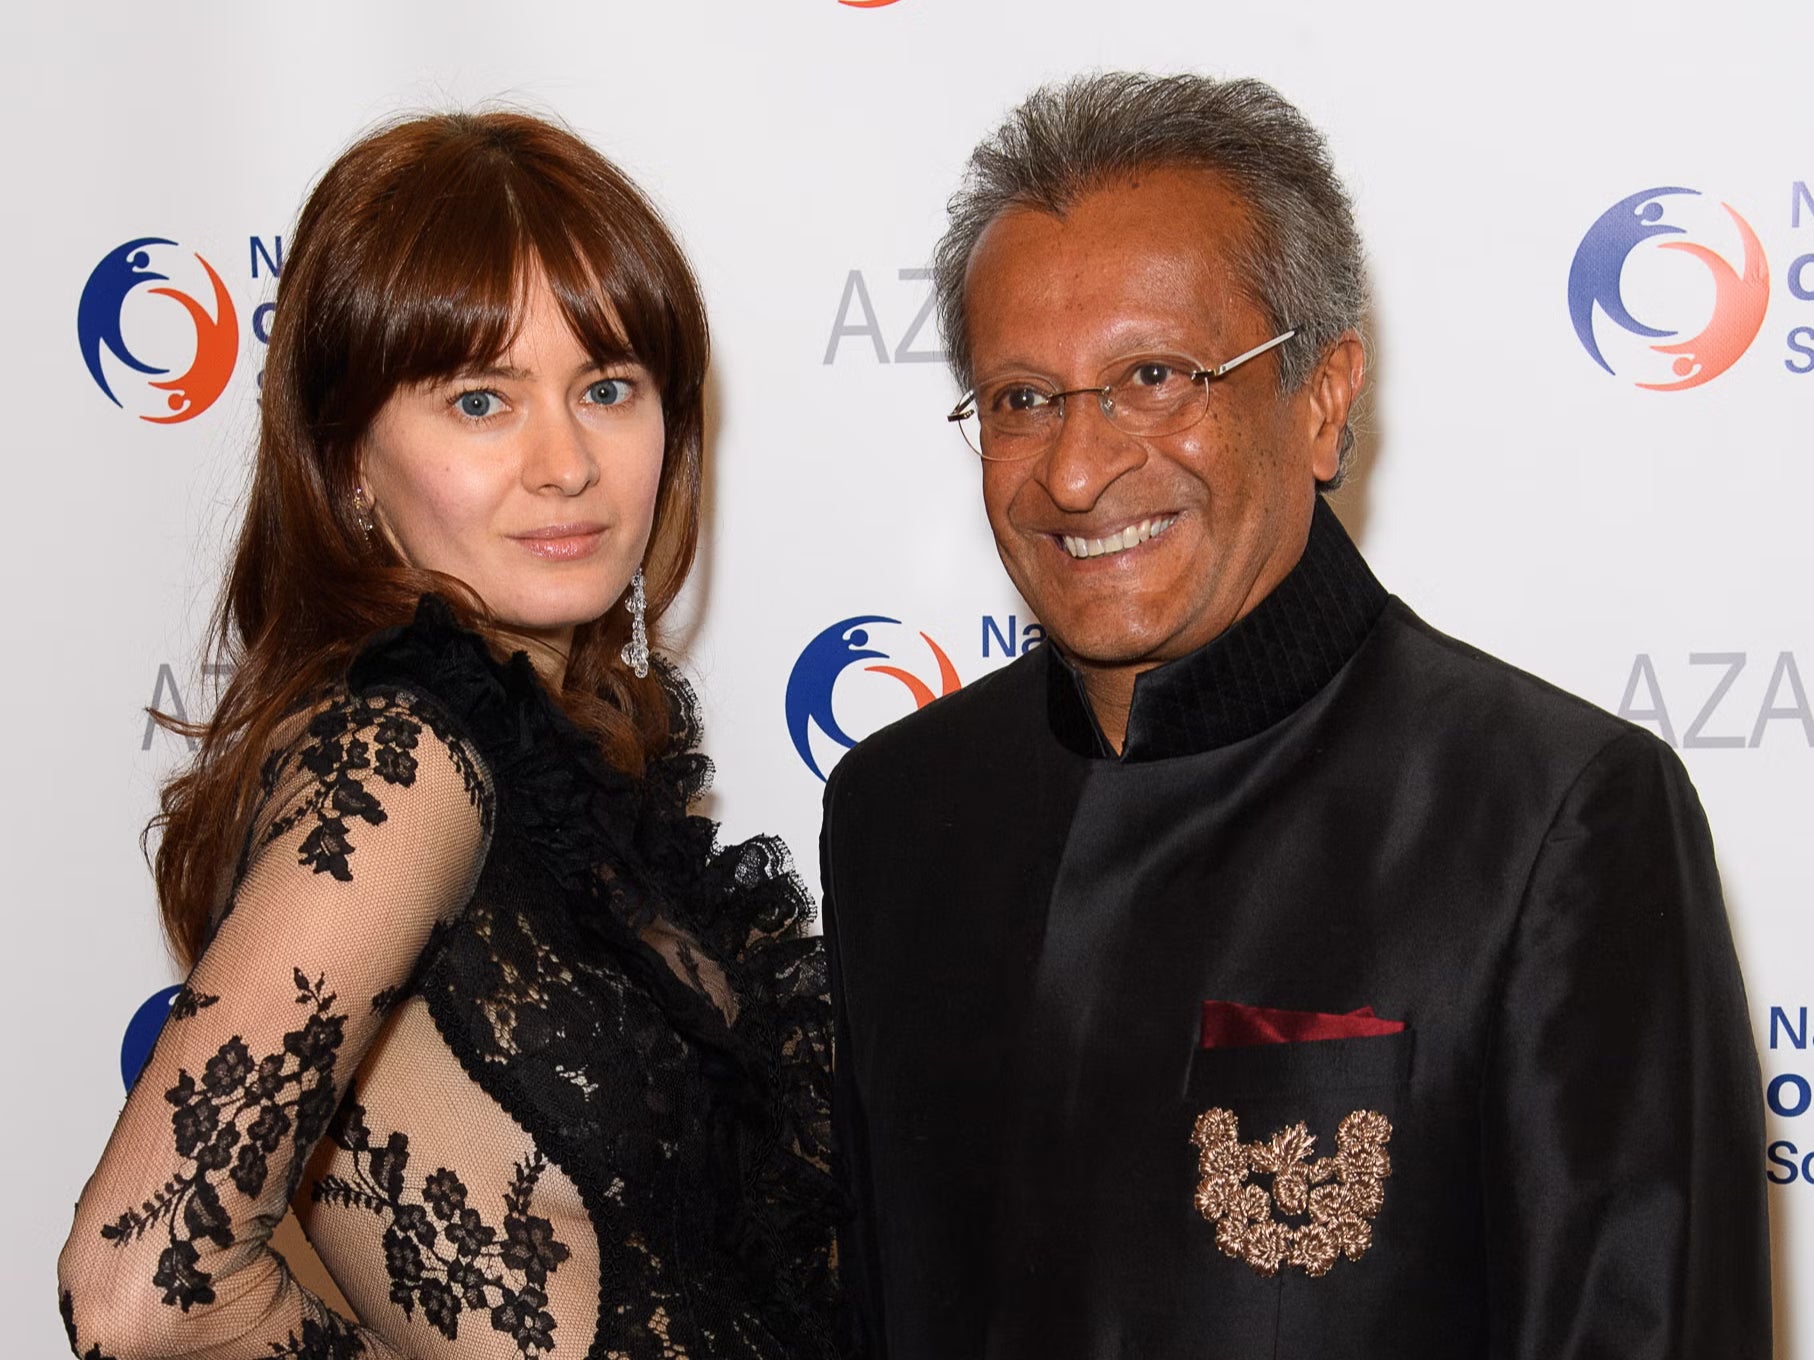 Multi-millionaire Tory donor Mohamed Amersi and his partner Nadejda Roditcheva